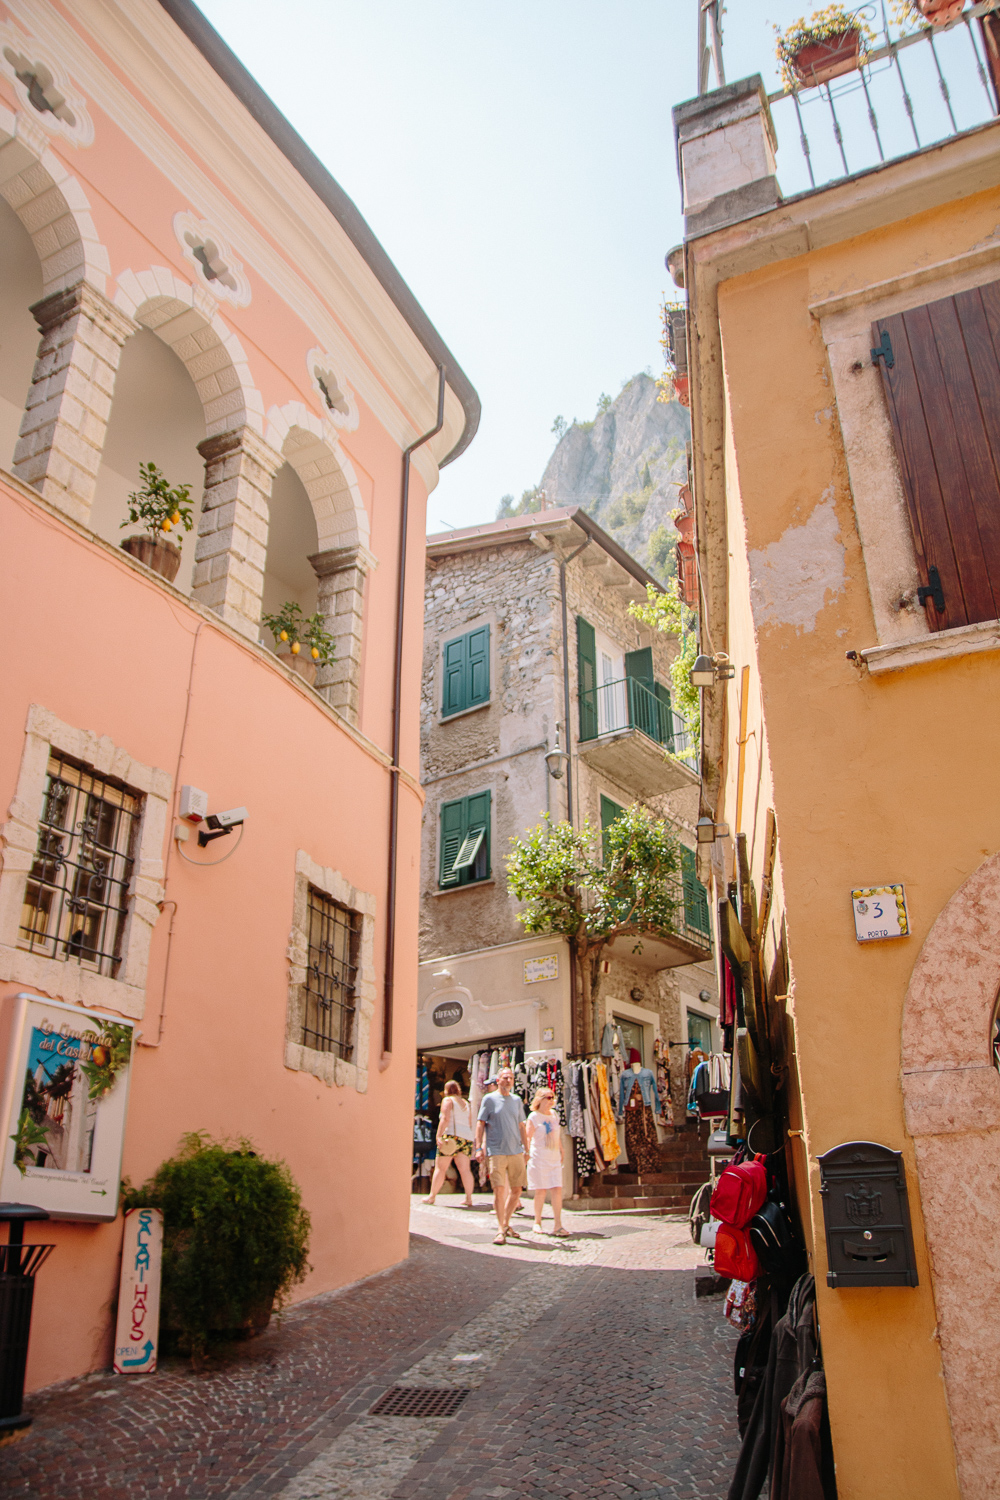 Peach and Yellow Coloured buildings on a street in Limone, Lake Garda